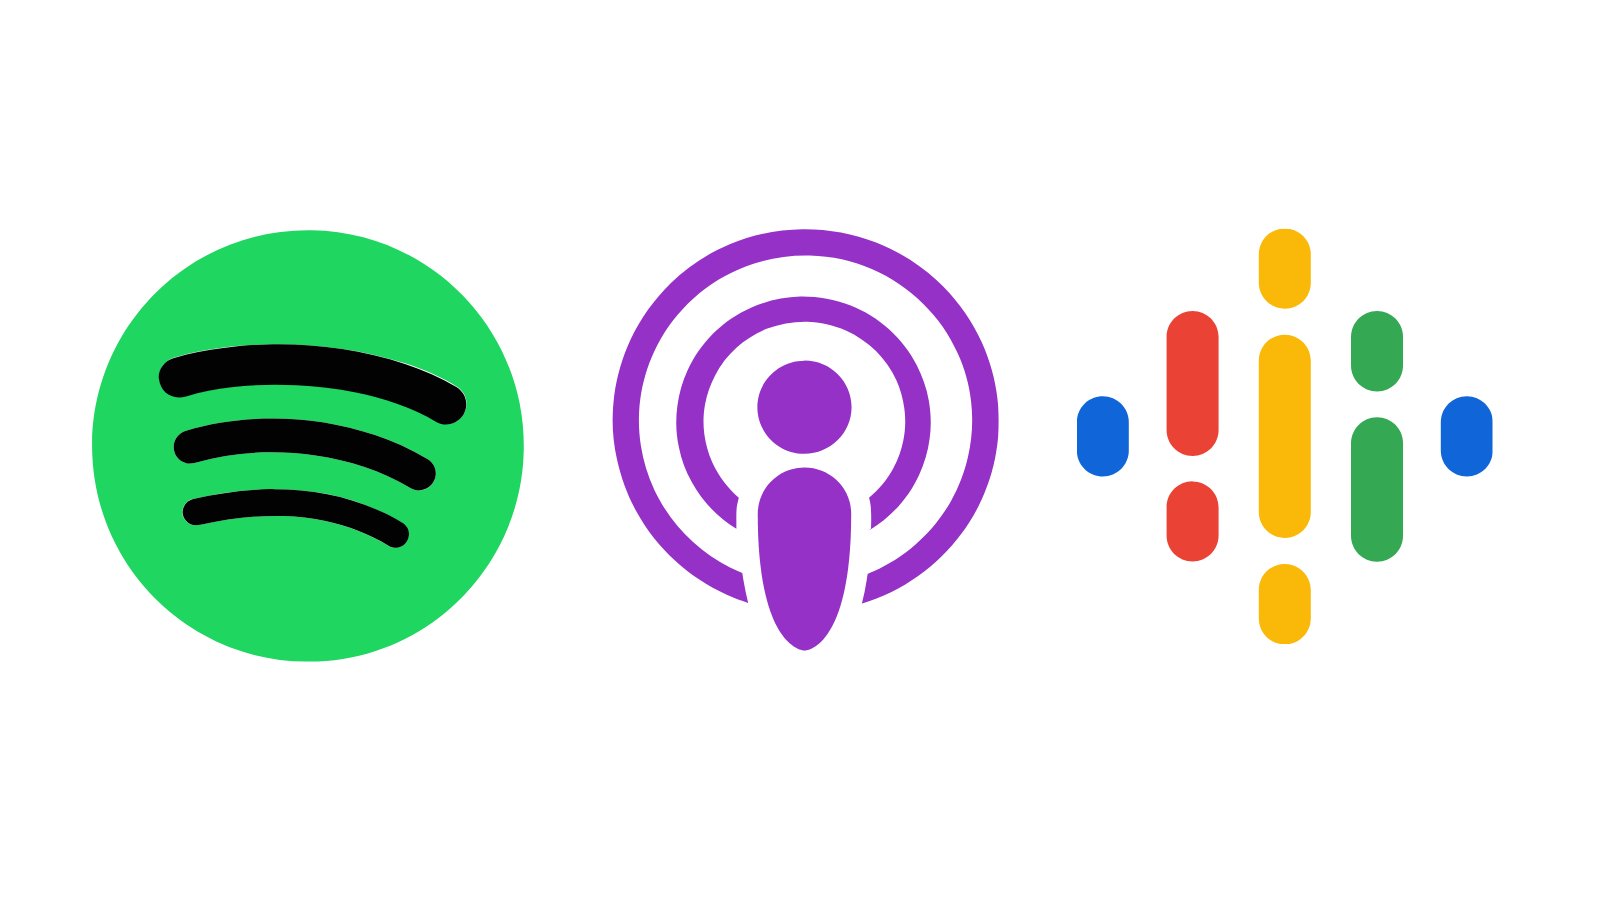 Spotify for Podcasters – Apps no Google Play